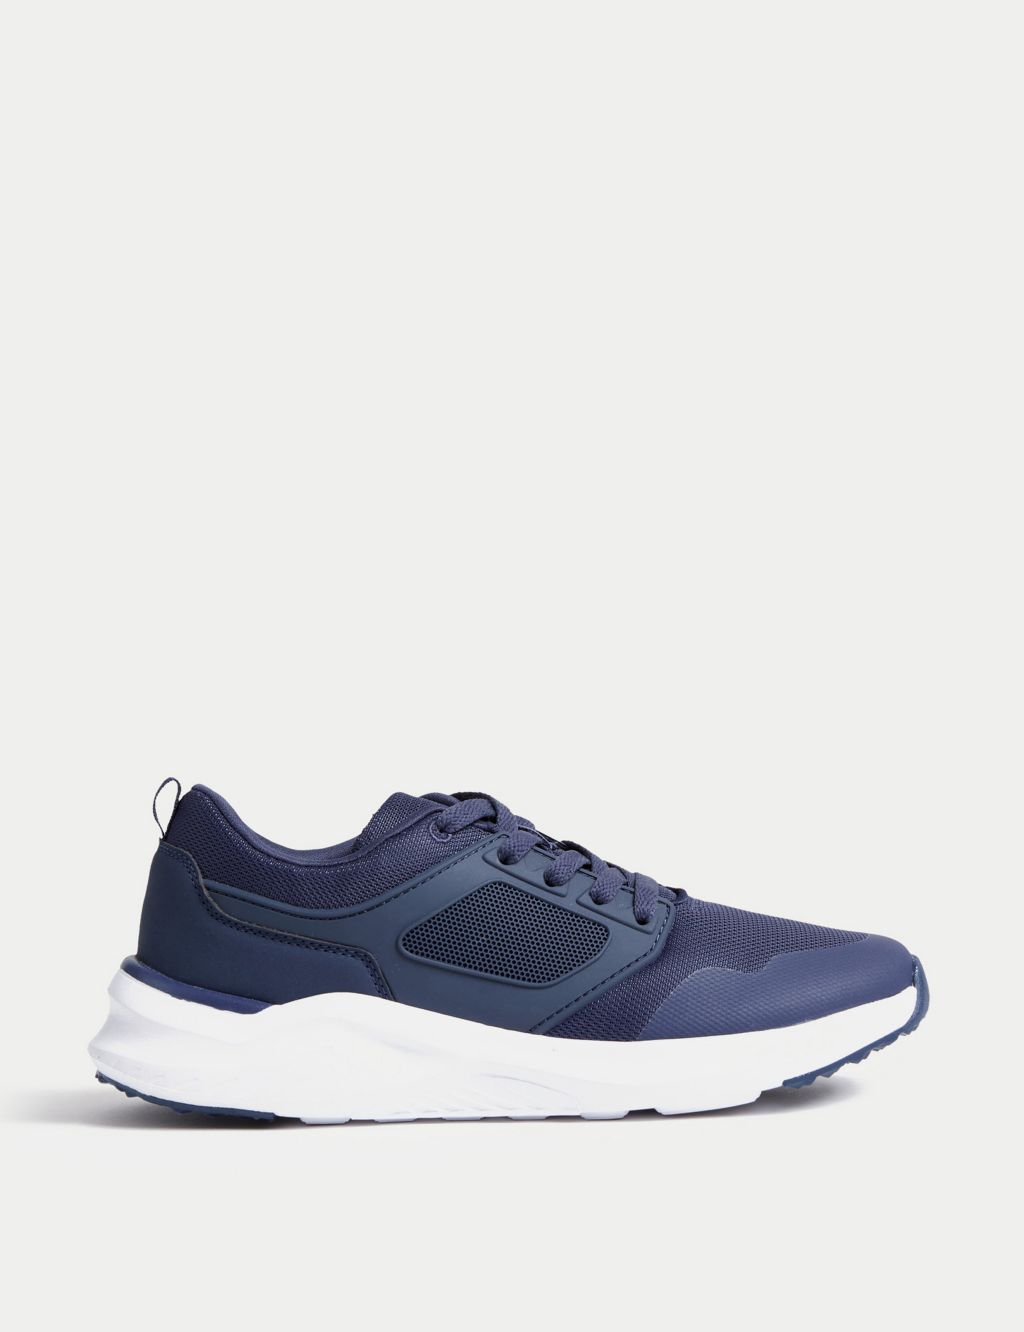 Boys' Trainers | M&S